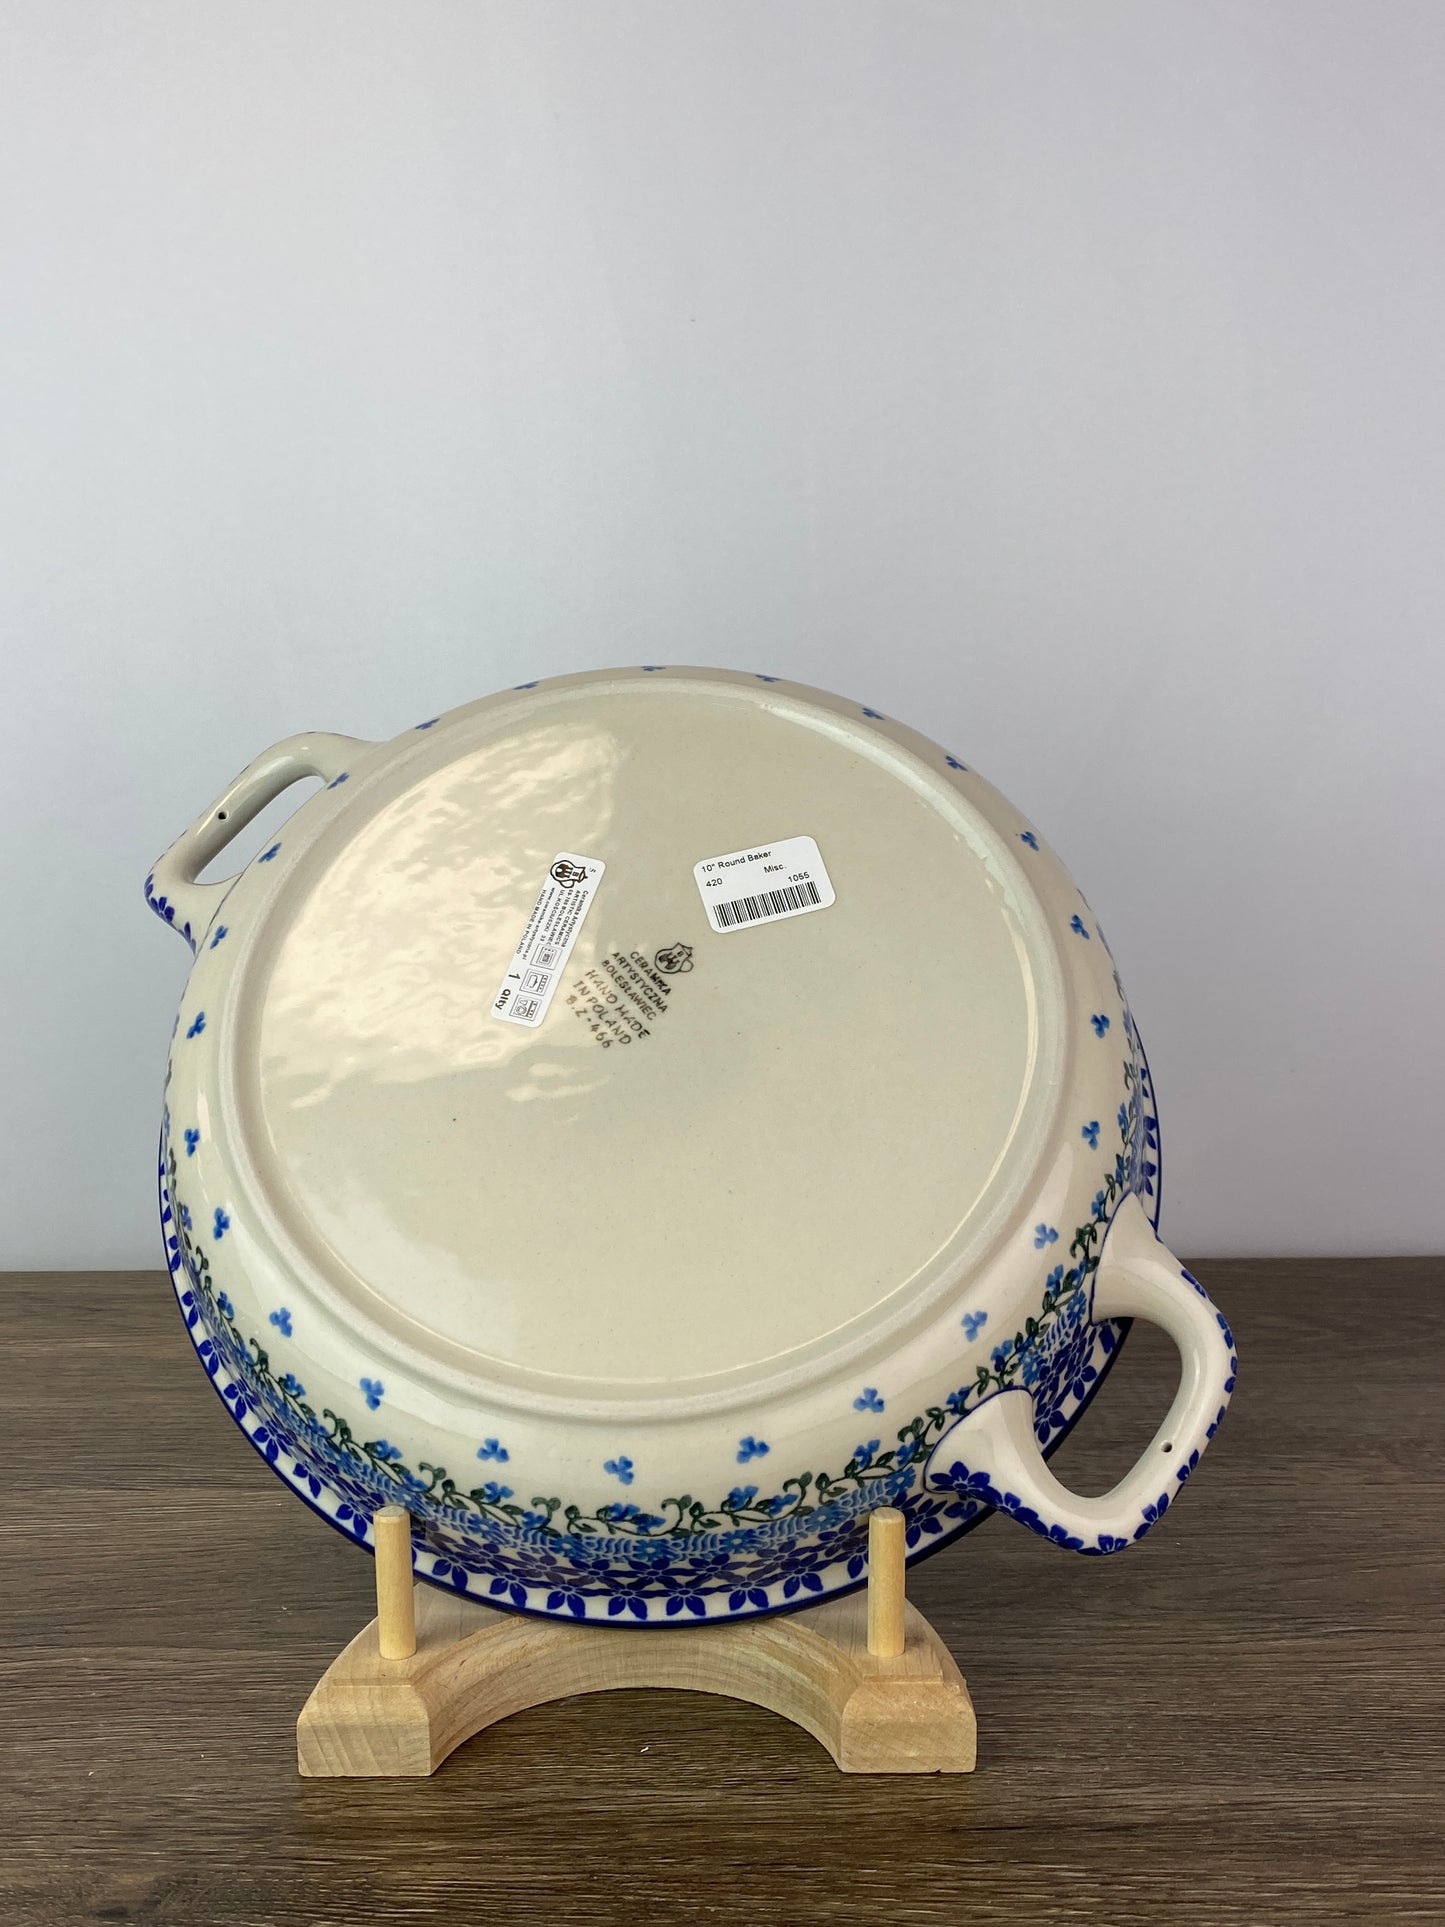 10" Round Baker With Handles - Shape 420 - Pattern 1821